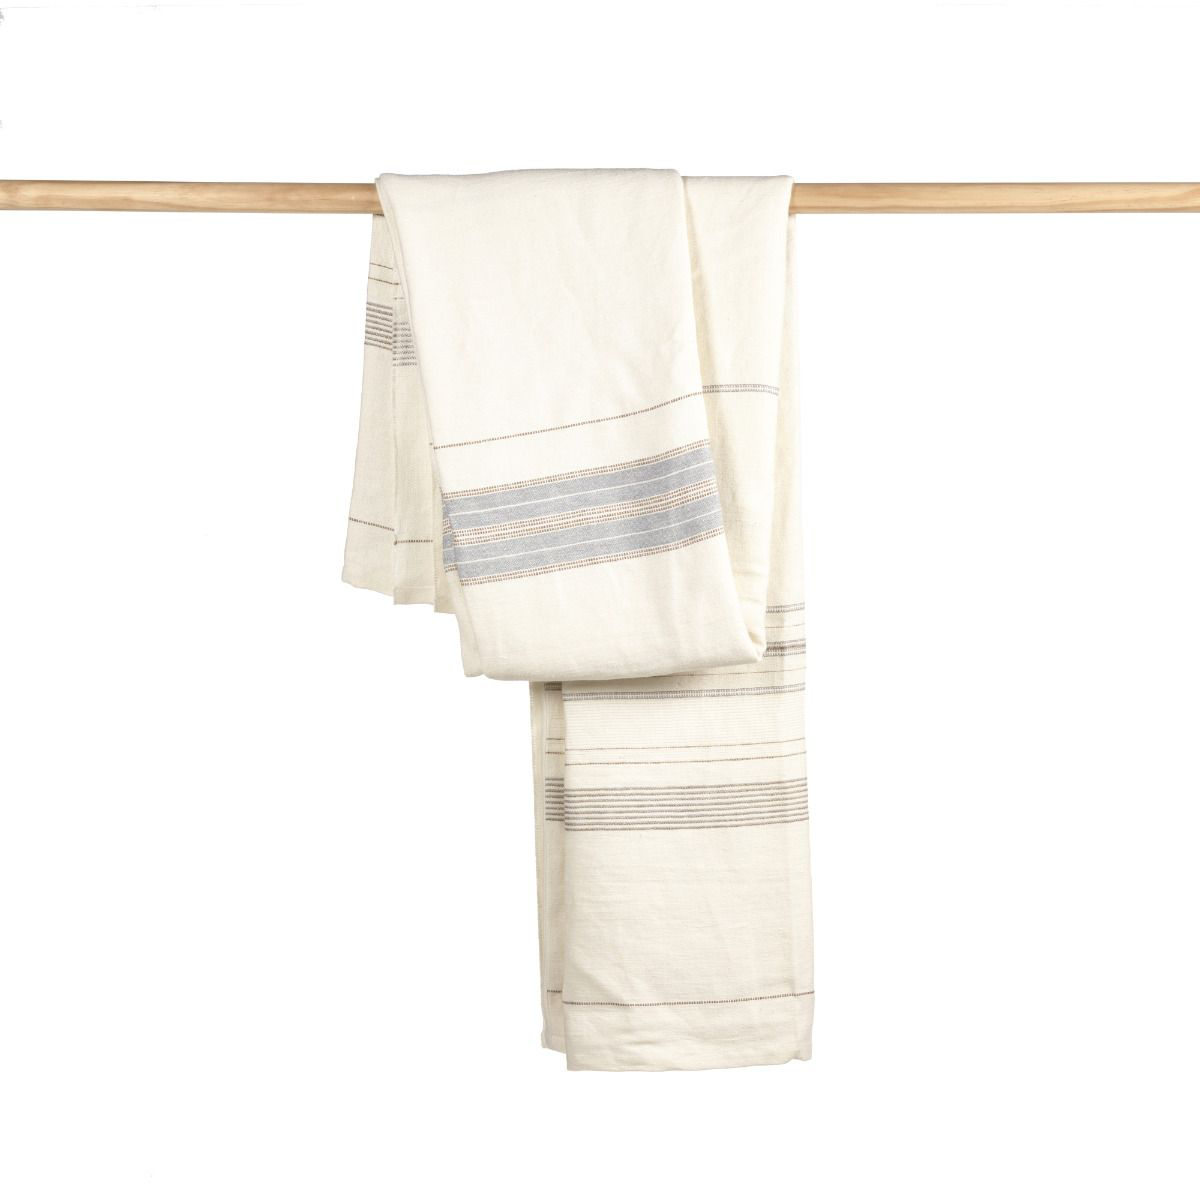 propriano coverlet, libeco, blanket | throw, - adorn.house